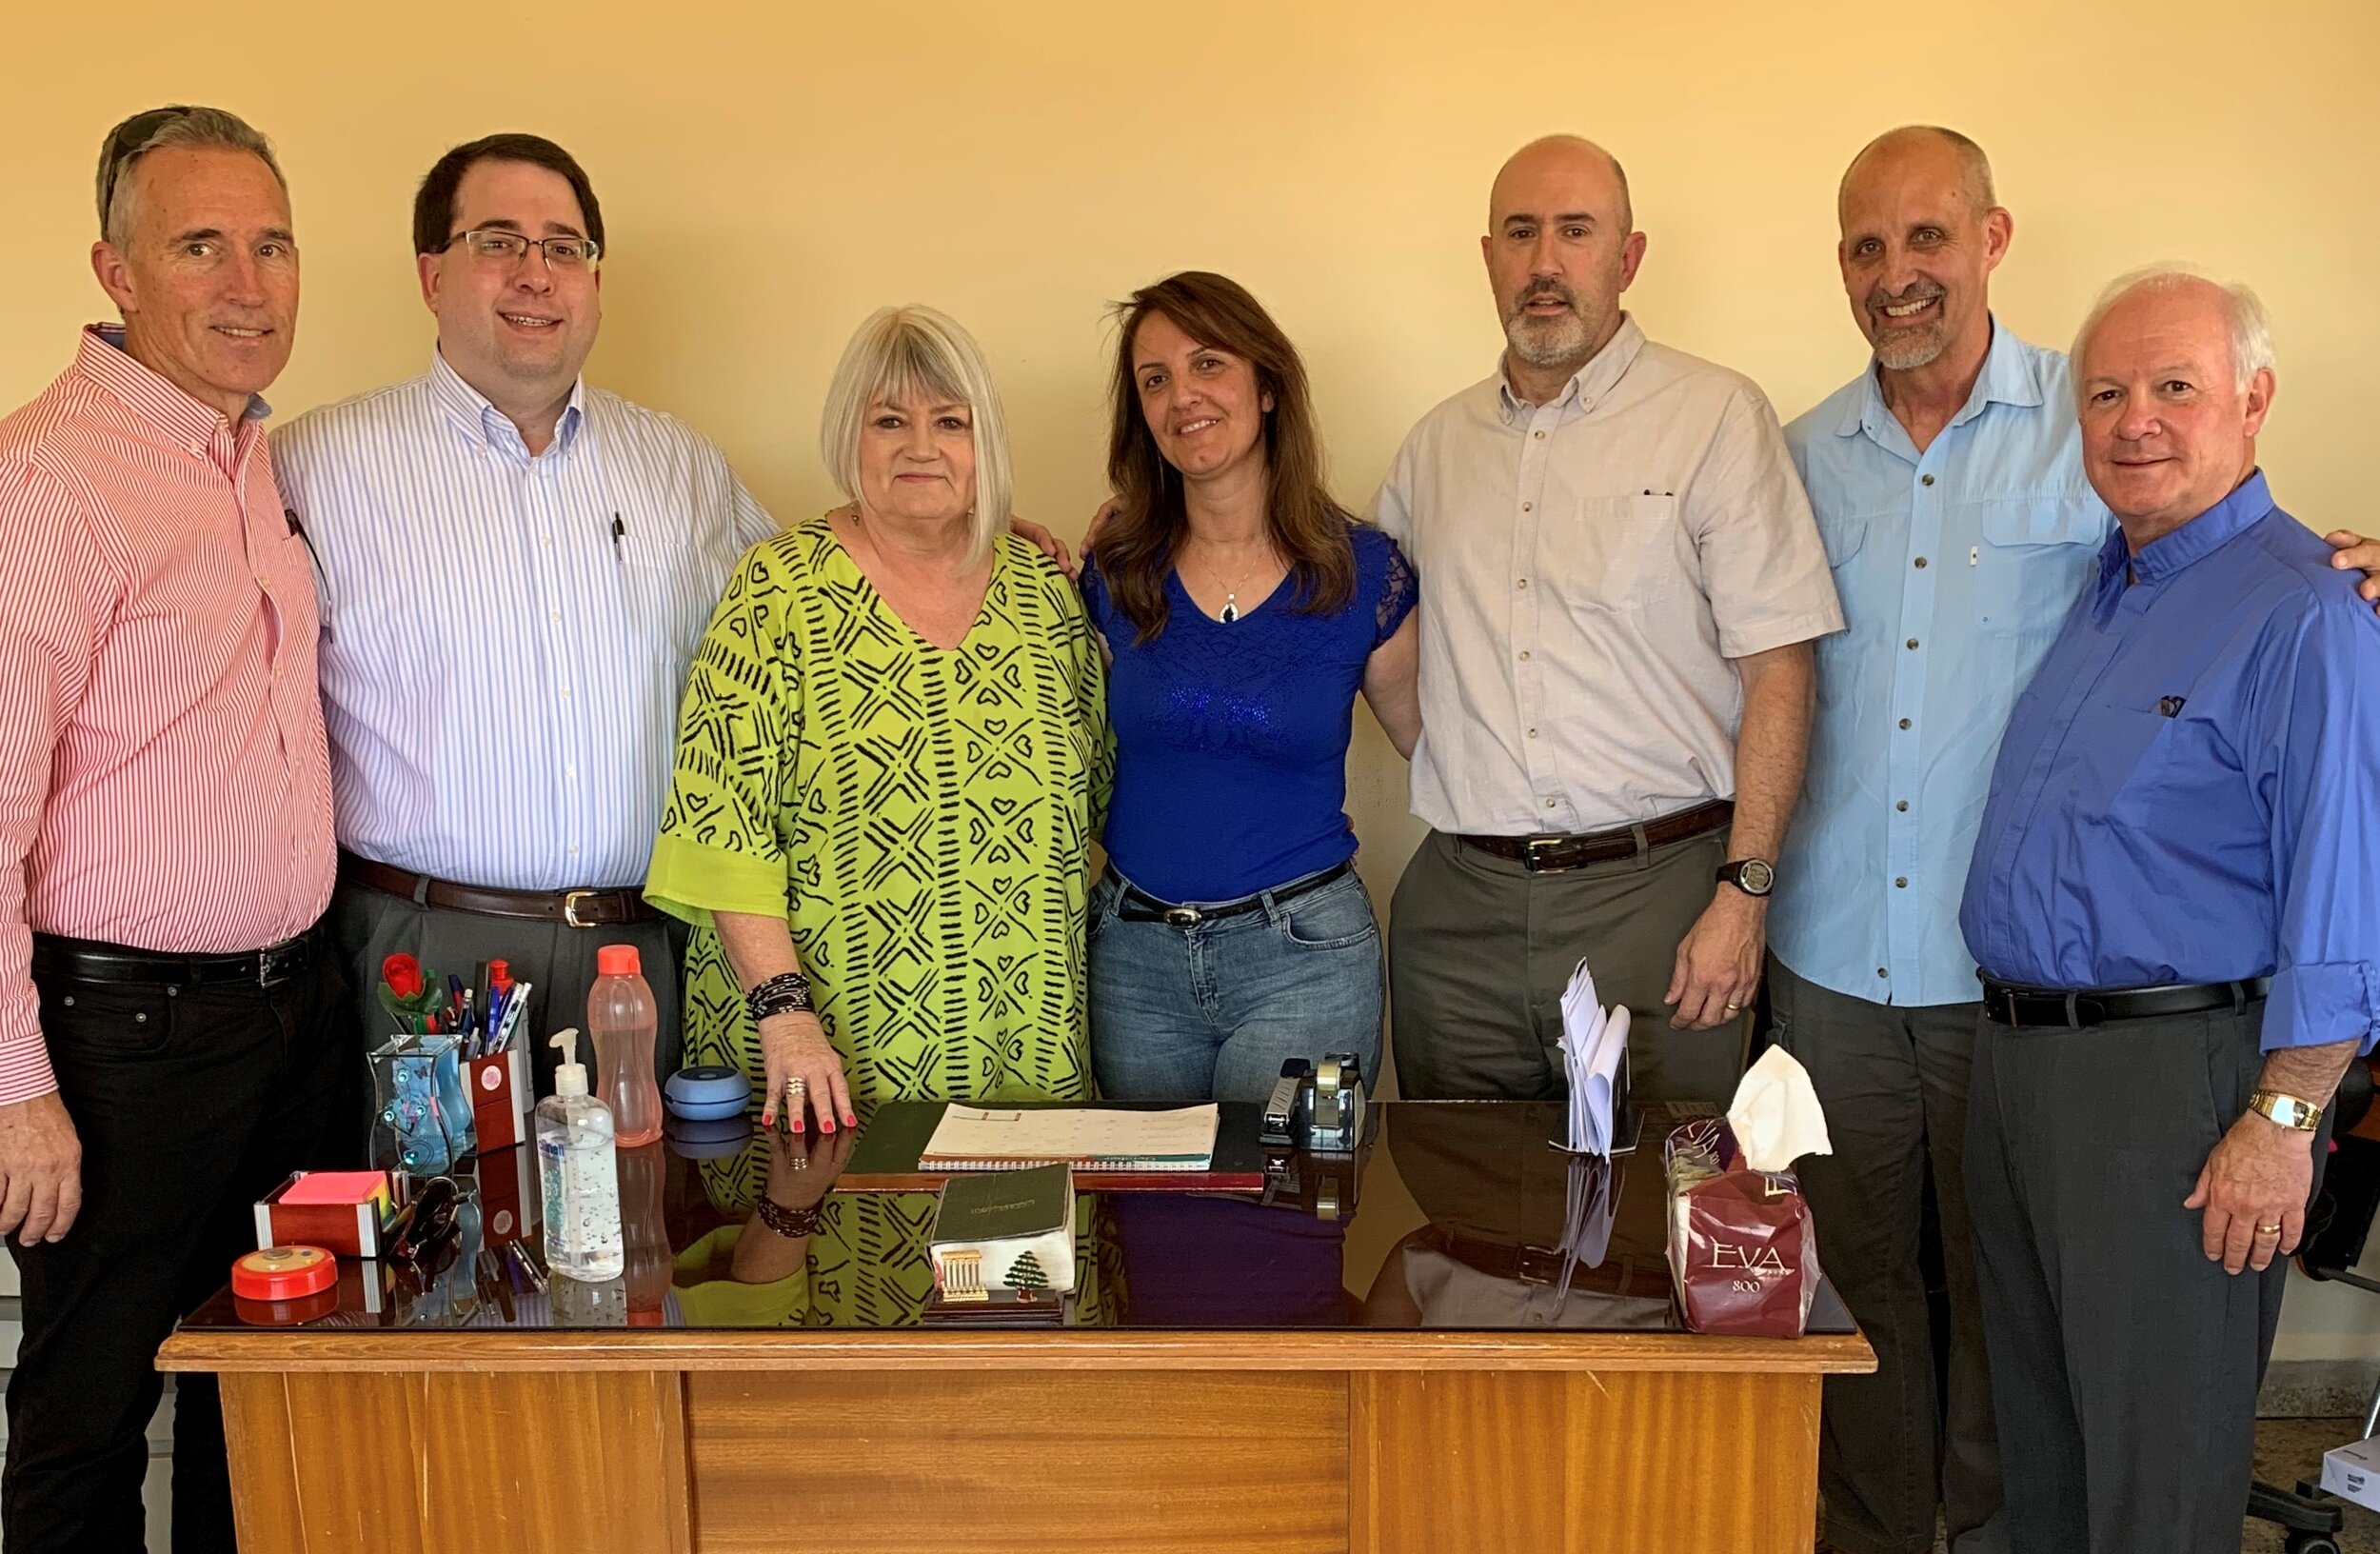  The Outreach Foundation team (Mark Mueller, Tony Lornenz, Marilyn Borst, Chris Weichman, Mike Kuhn, Jack Baca) with Ramak Abboud (center) who oversees the refugee school in Kab Elias 